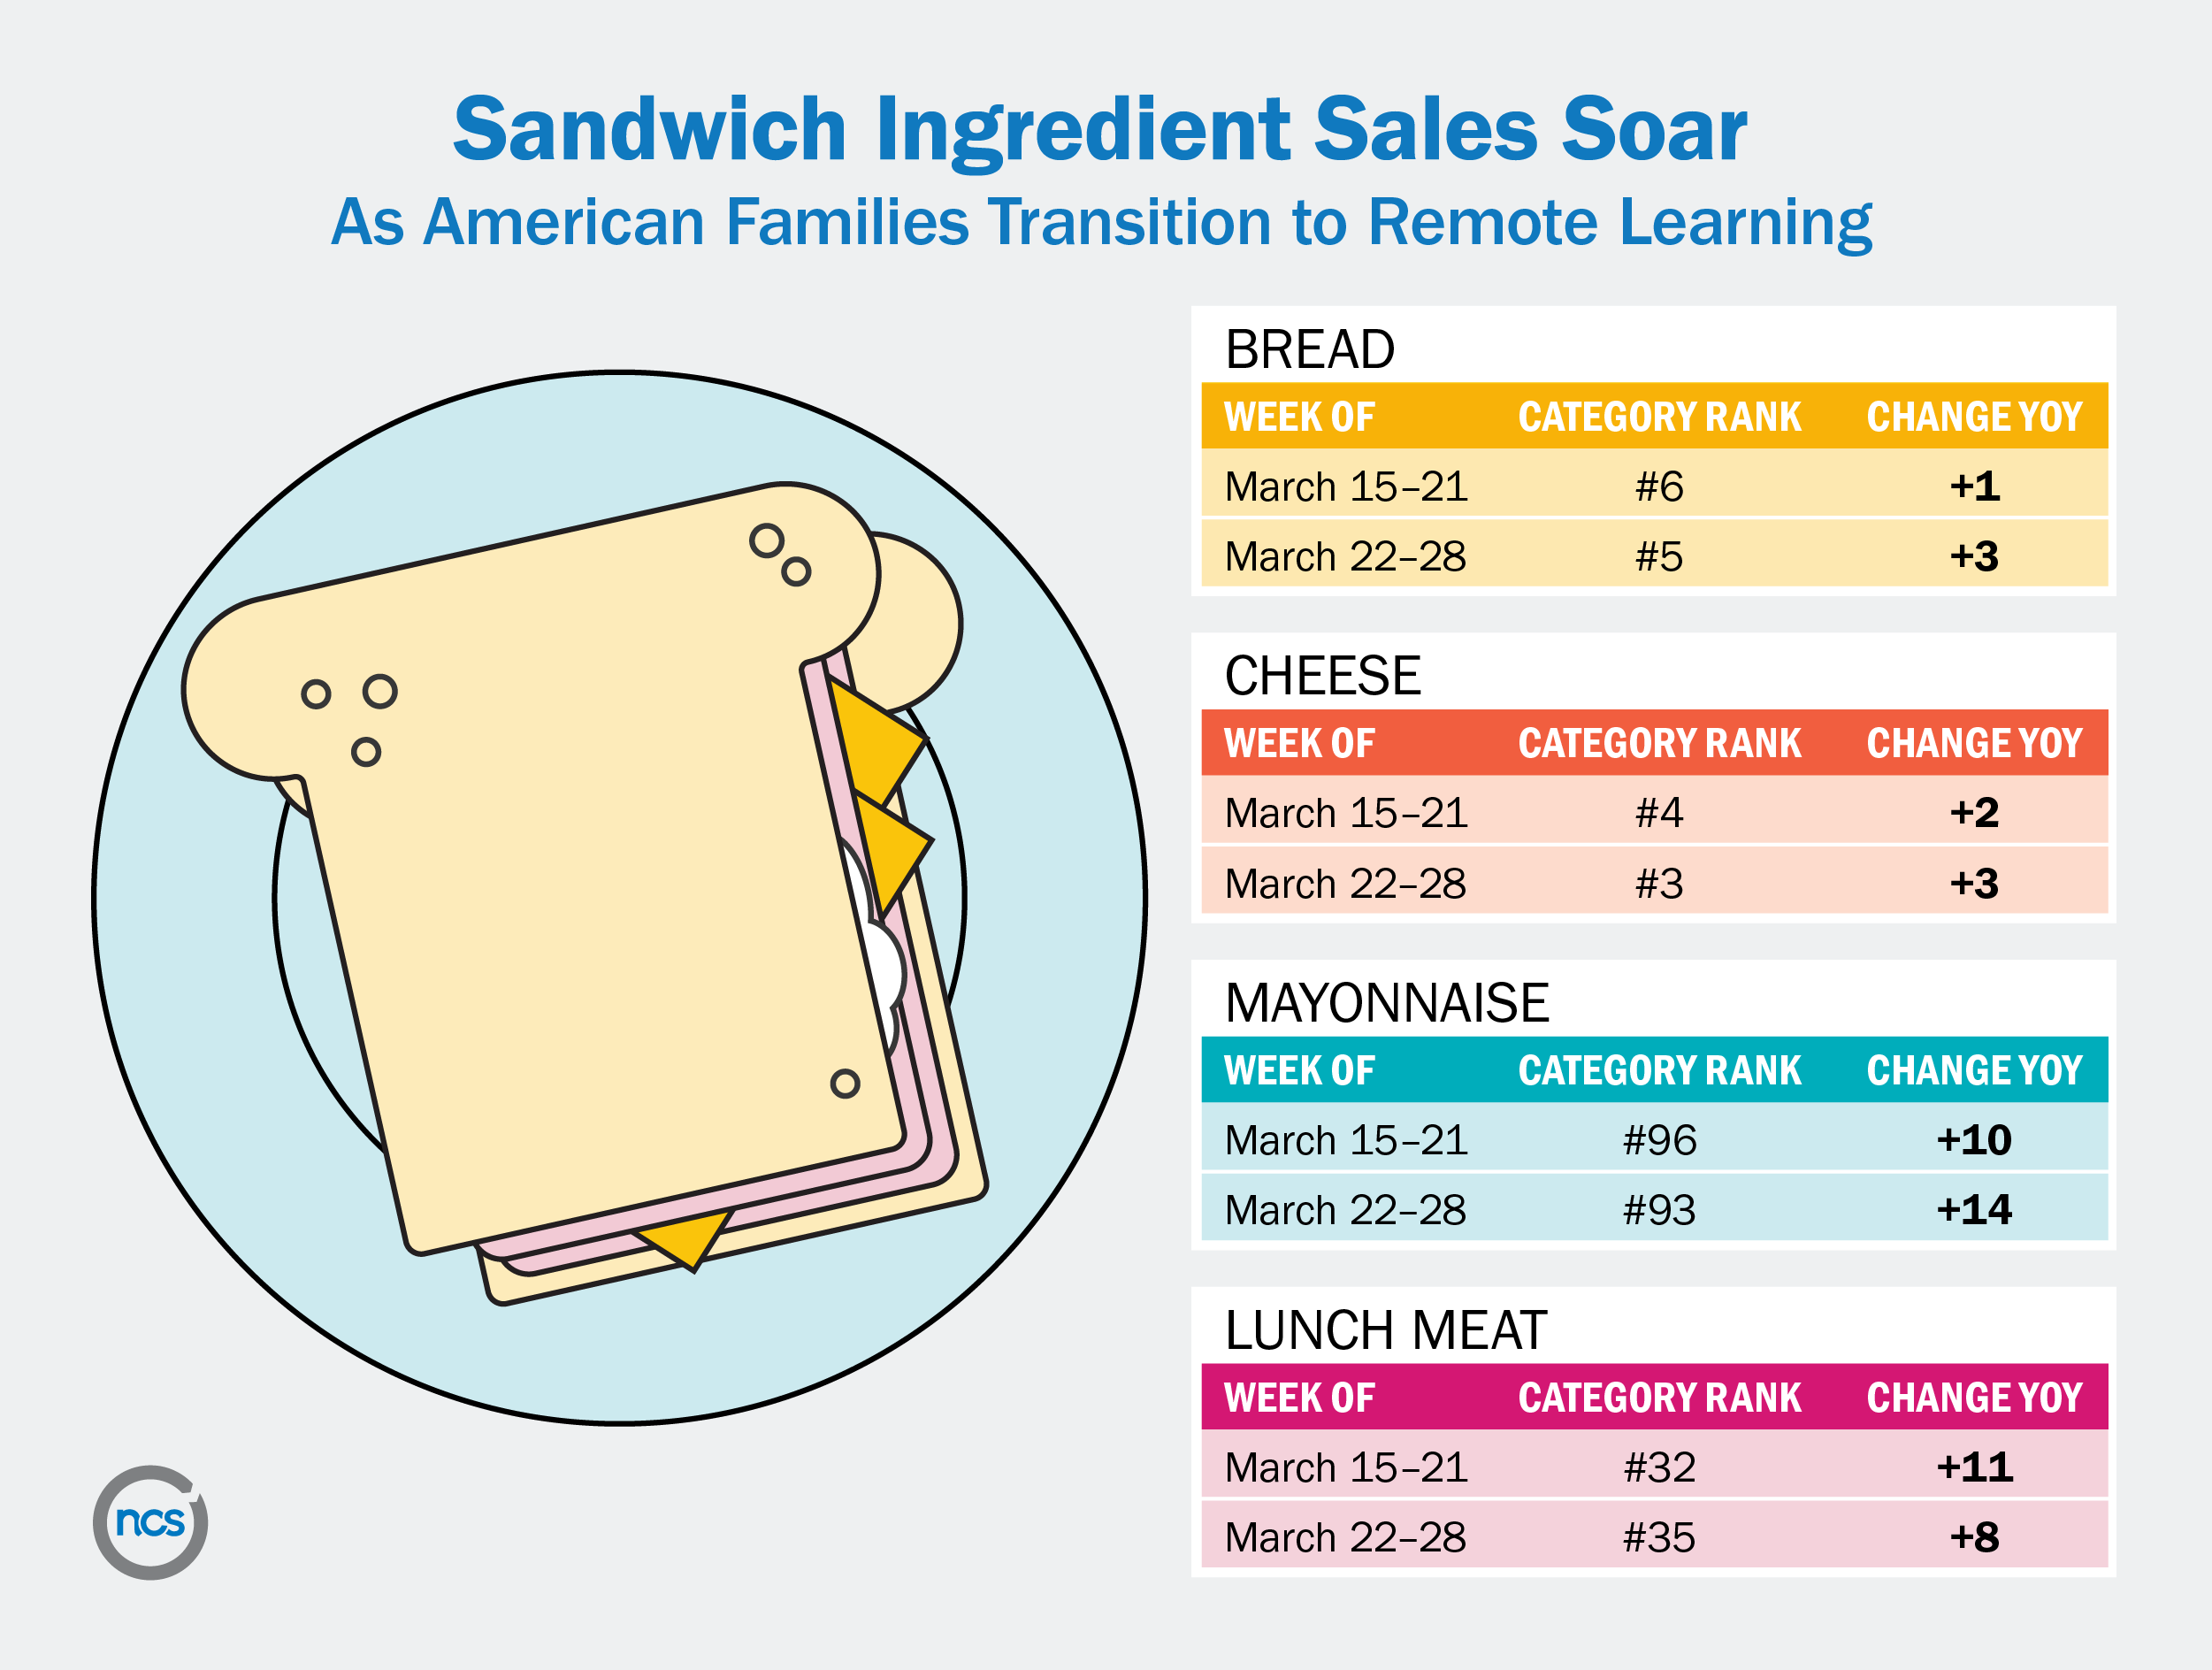 Graphic that shows sandwich ingredients like bread, cheese, lunch meat, and mayo are increasing in sales